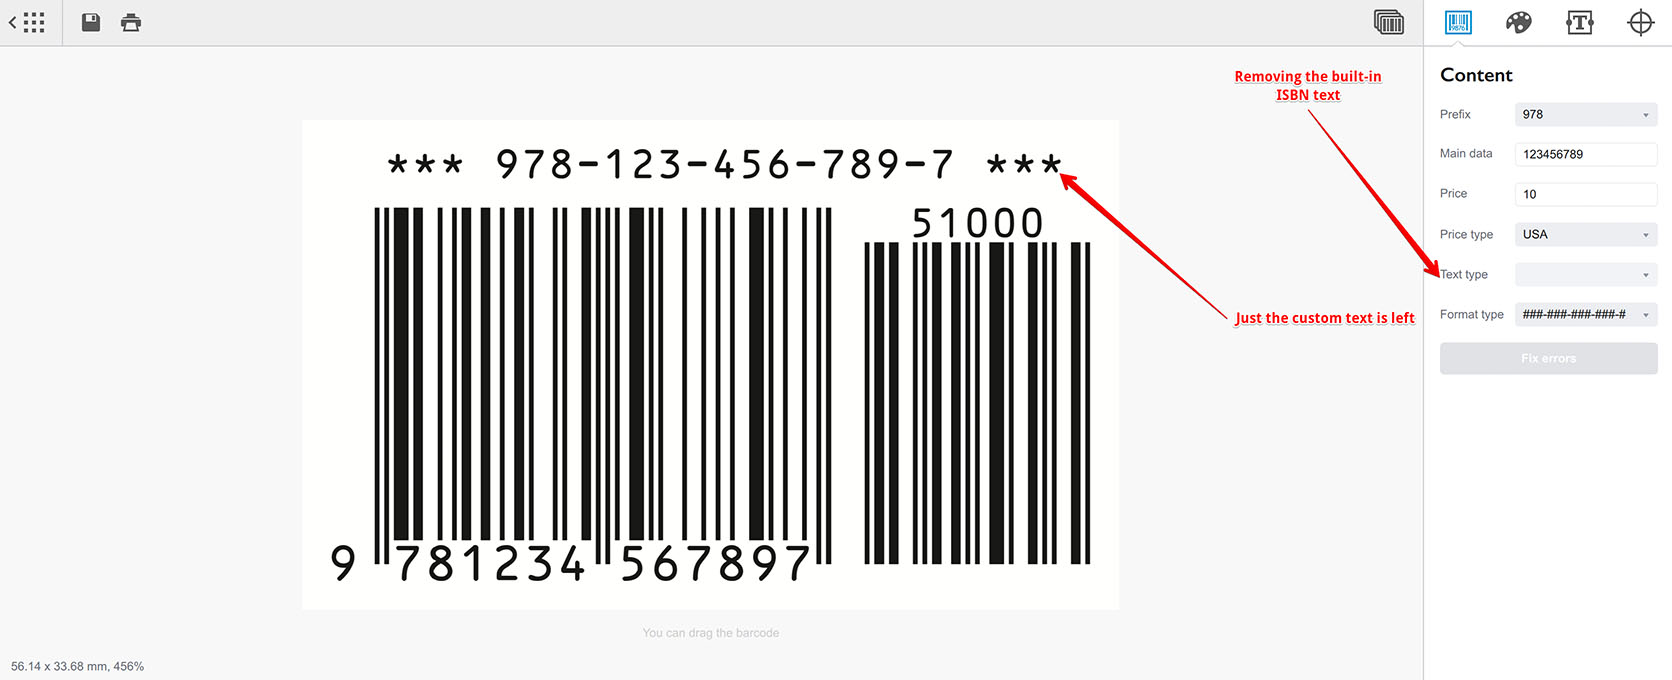 Leaving just a custom text for ISBN barcode